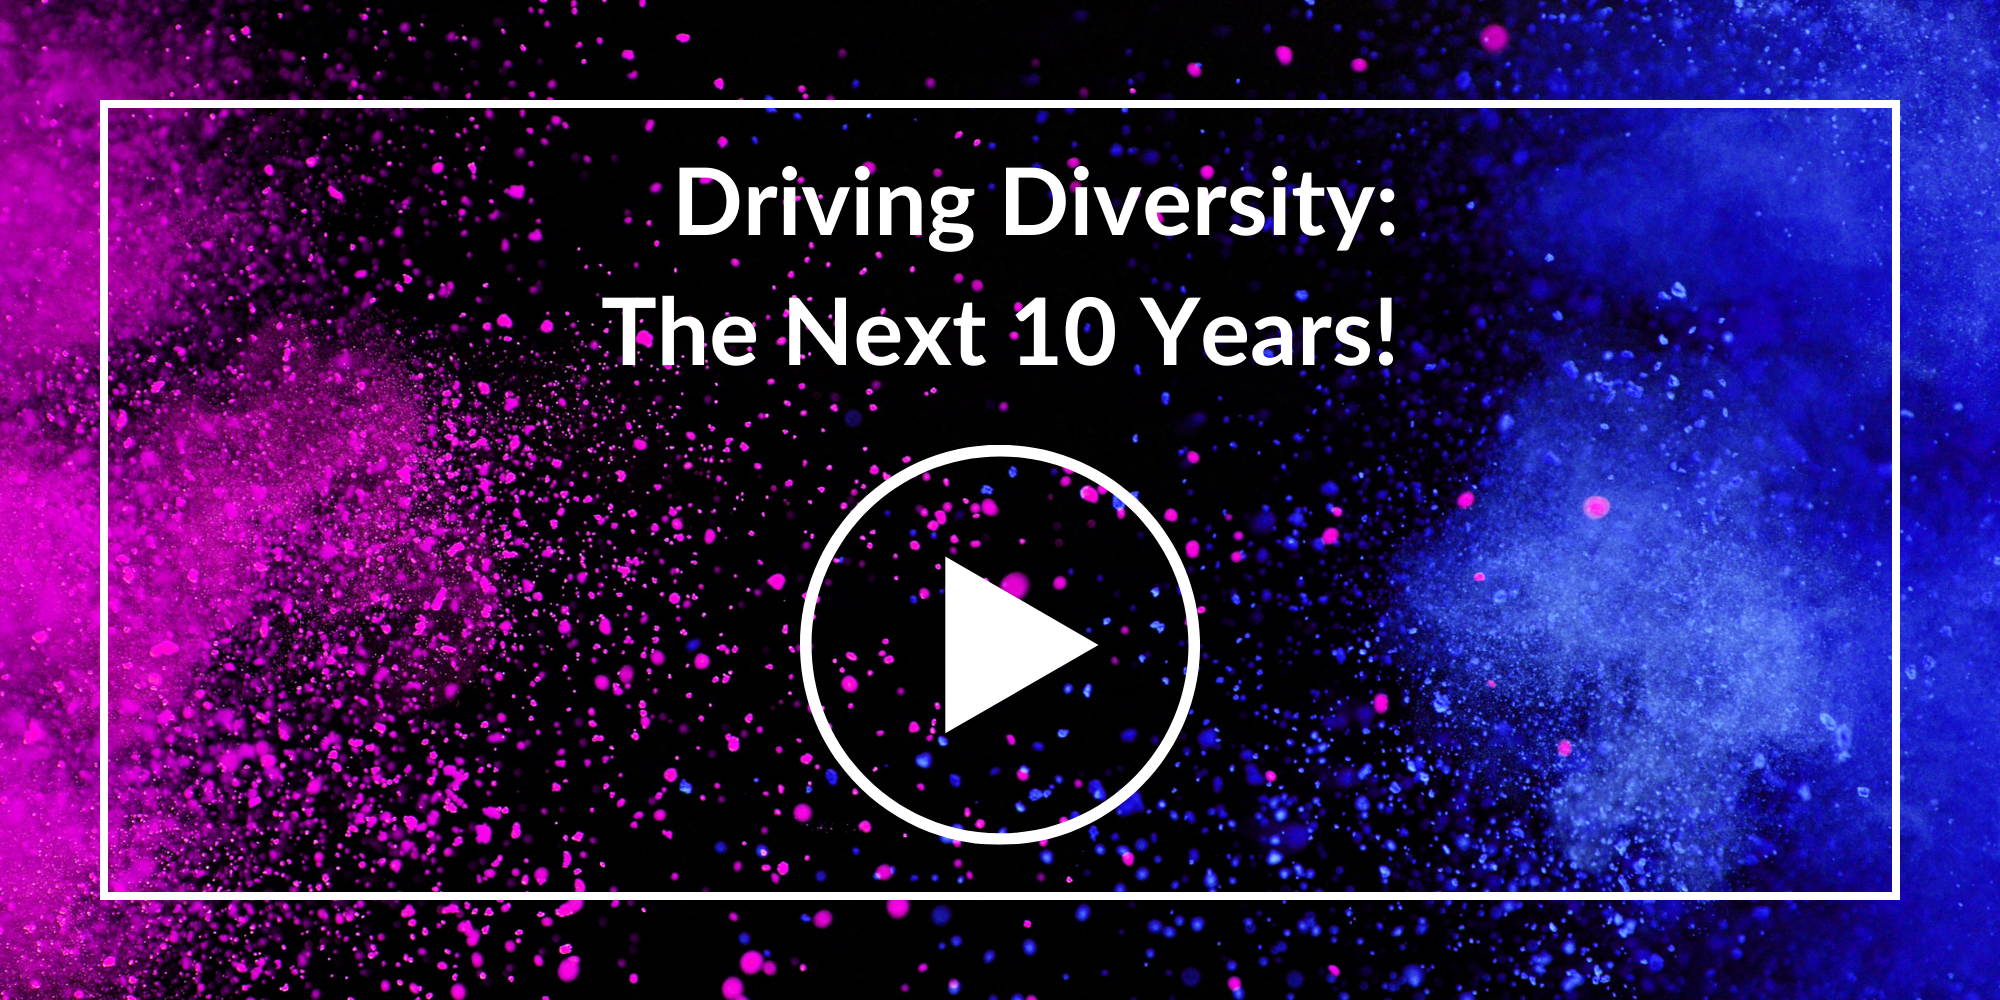 Driving Diversity The Next 10 Years! (11)